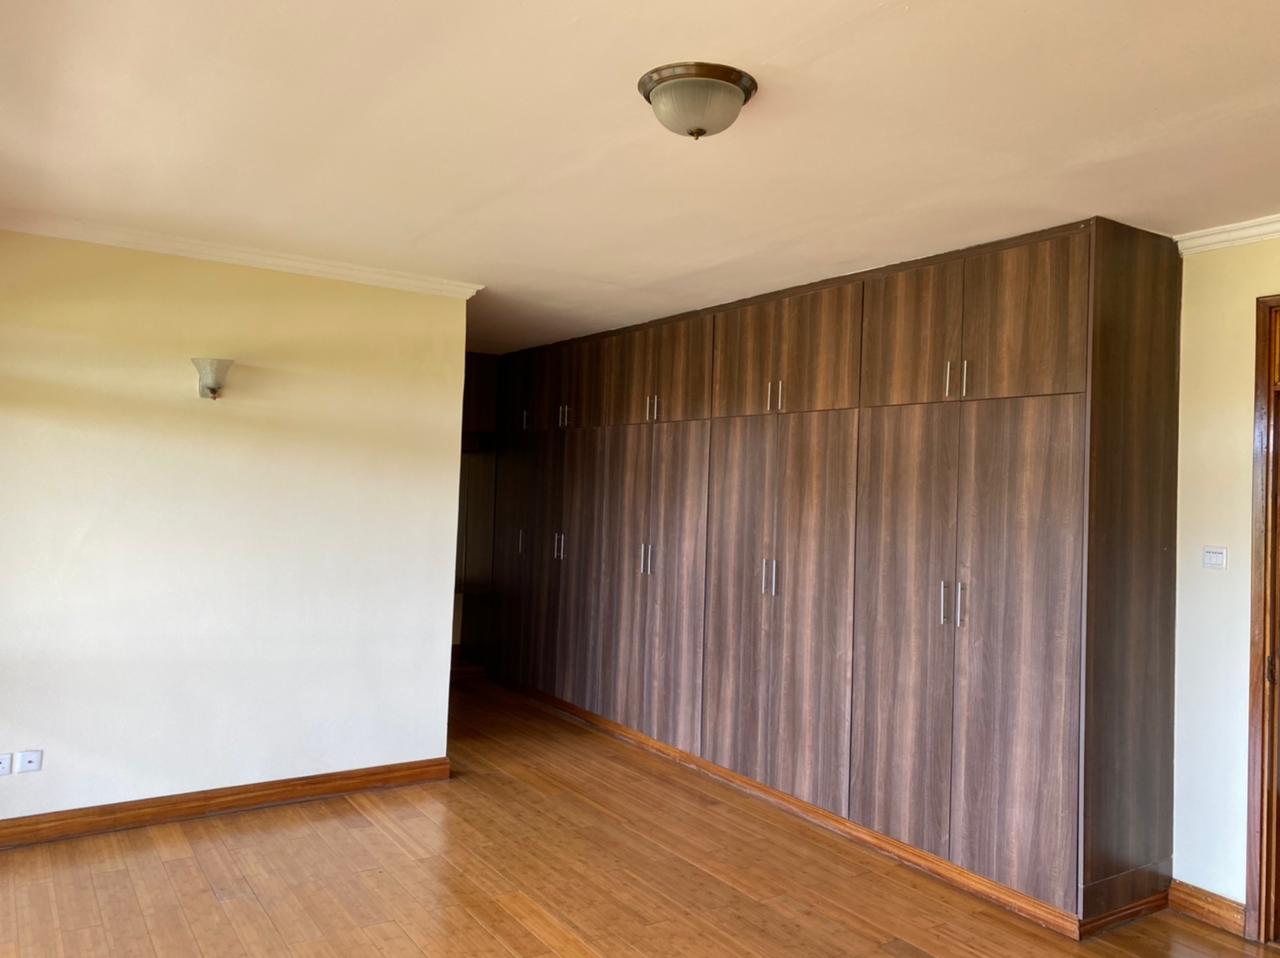 4 Bedroom All Ensuite Apartment for Rent in Kilimani at Ksh200k with exciting amenities  (16)